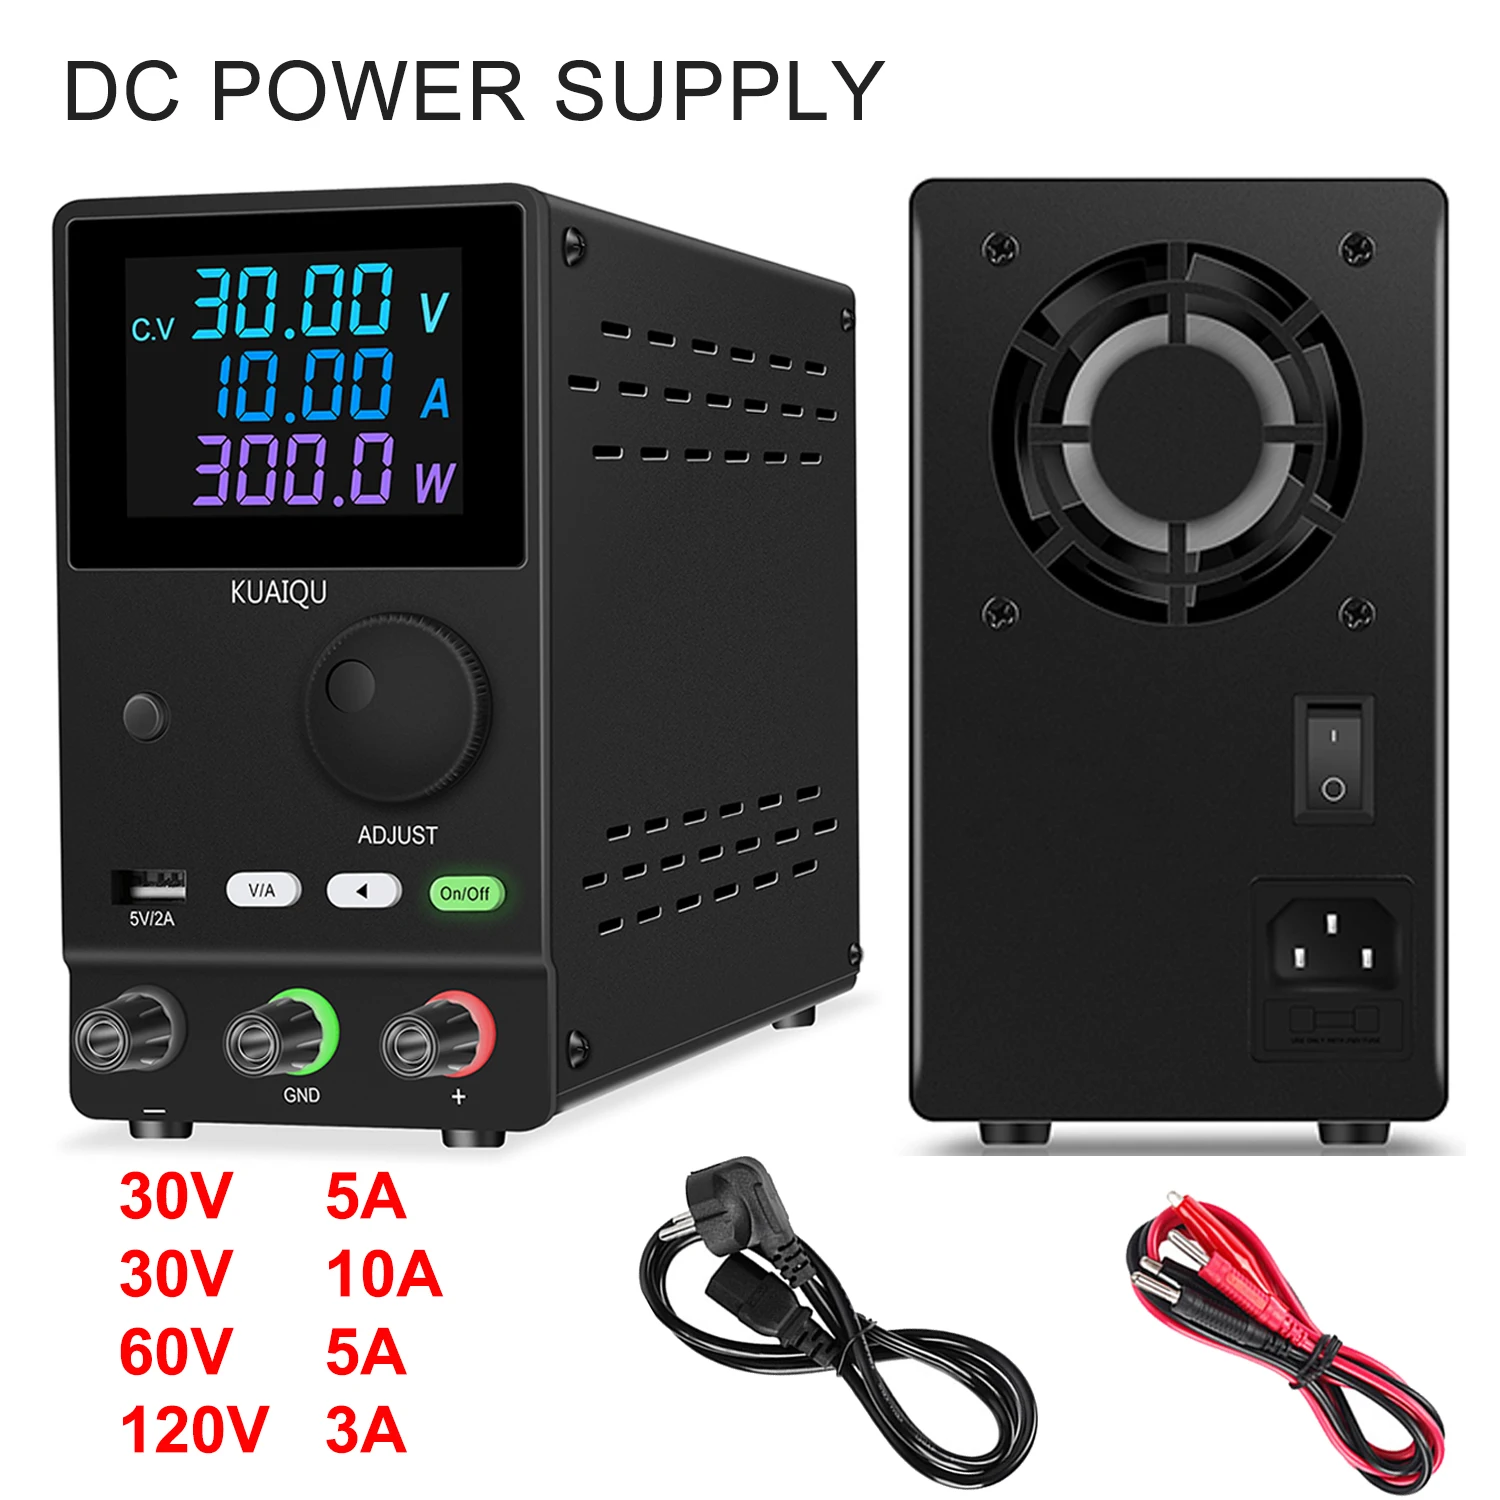 

DC Switching Power Supply 30V10A Adjustable Lab Bench Power Source Voltage Regulator Low-ripple AC To DC For Mobile Phone Repair